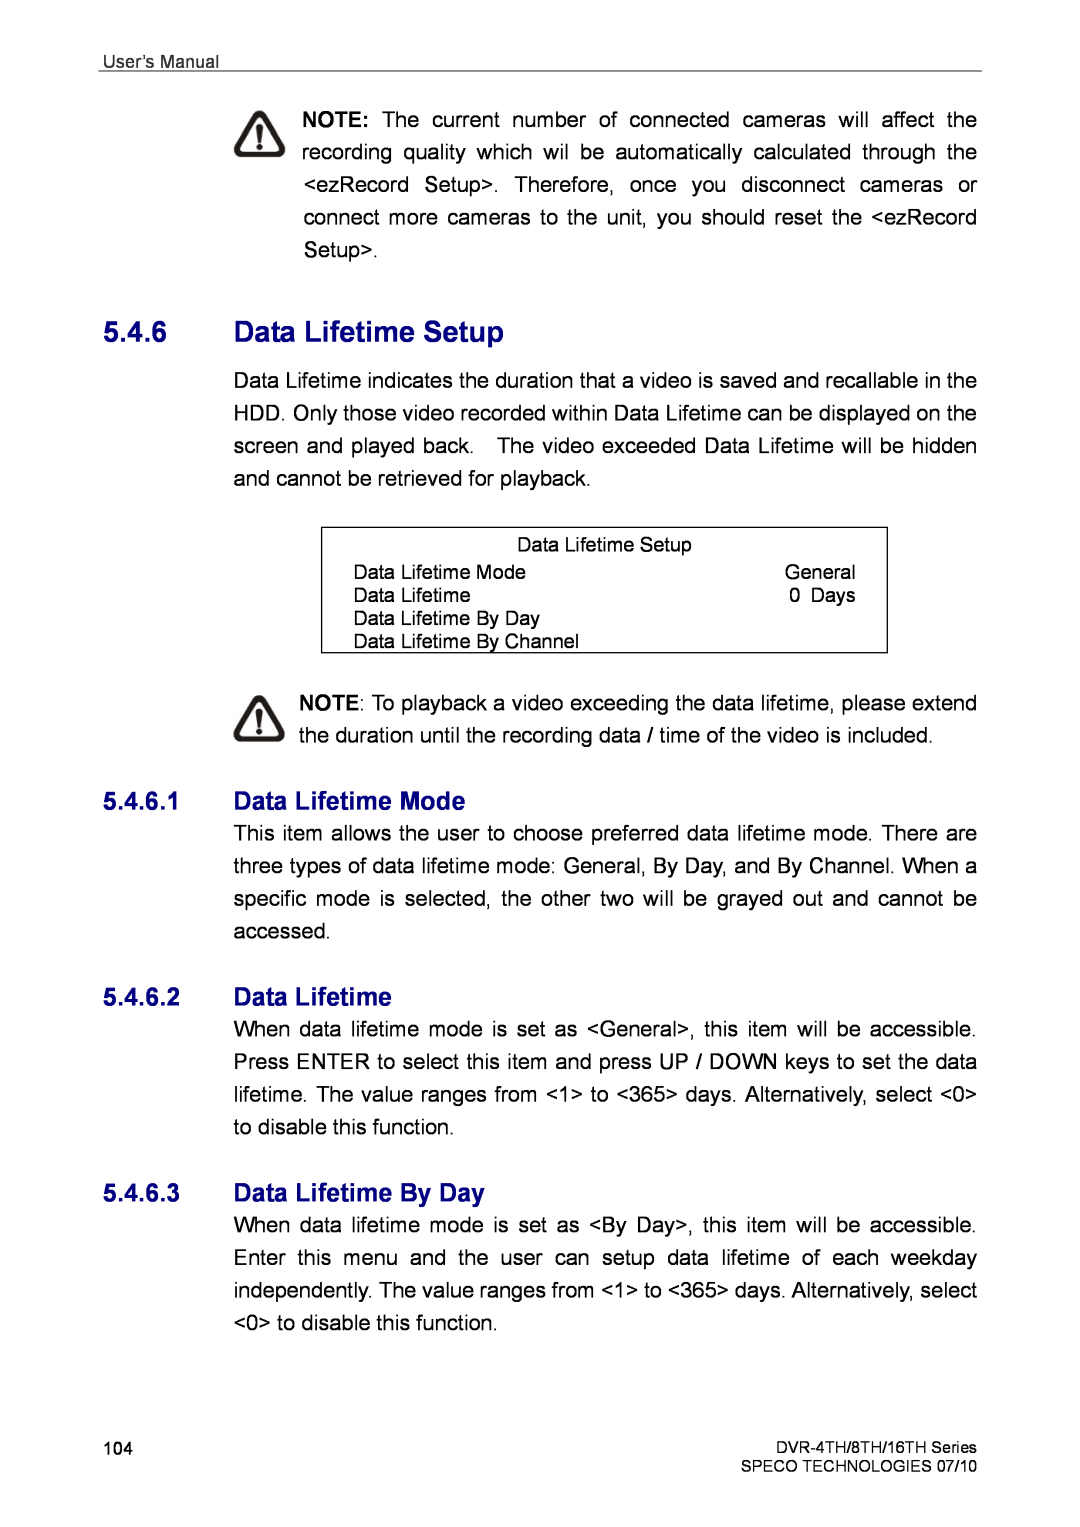 Speco Technologies 8TH, 4TH, 16TH user manual Data Lifetime Setup, Data Lifetime Mode, Data Lifetime By Day 